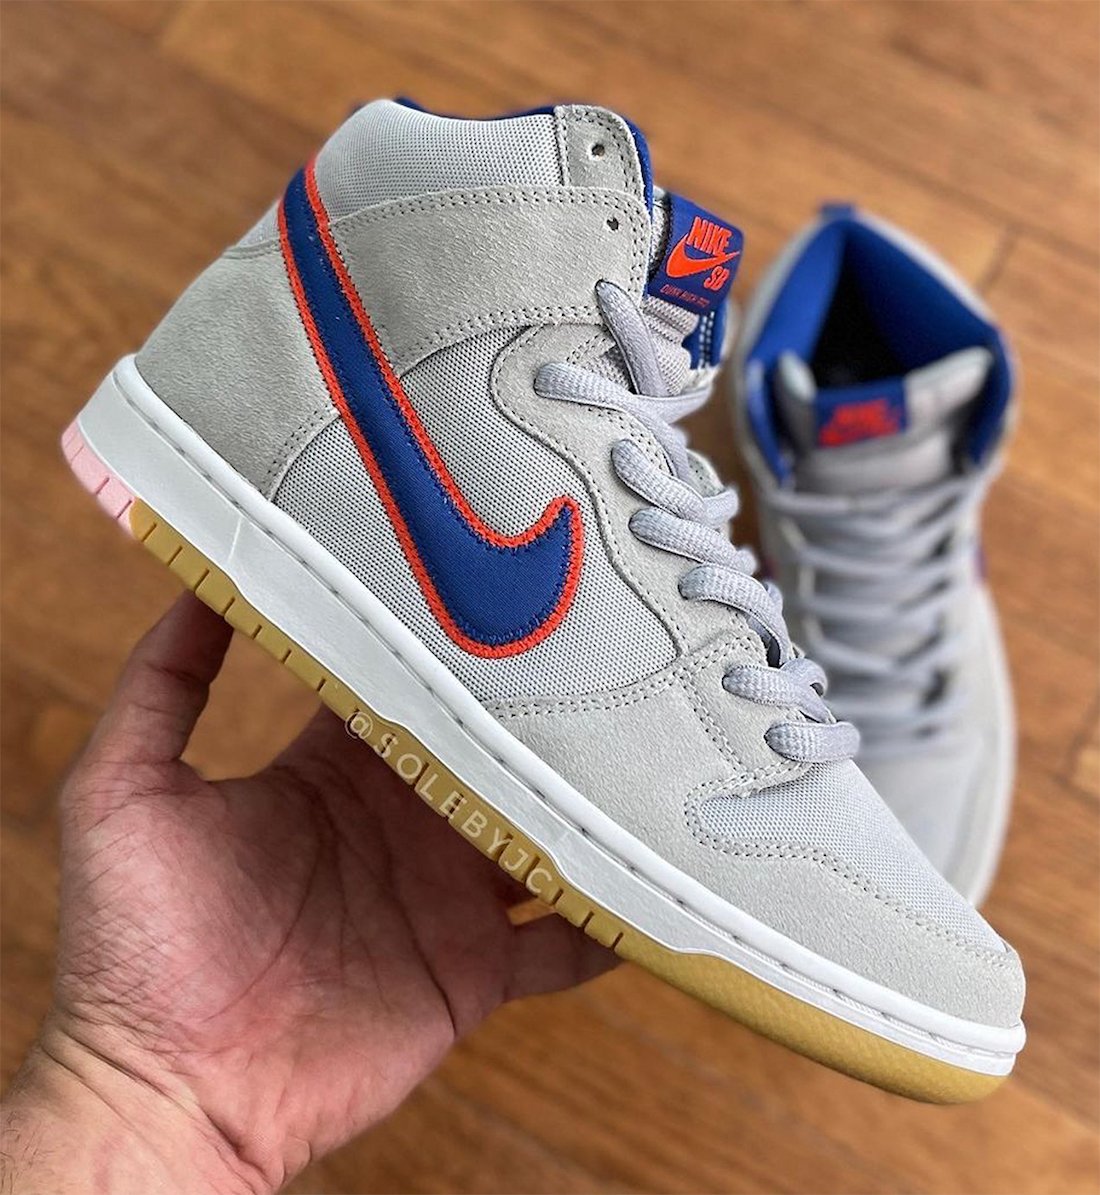 Nike SB Dunk High New York Mets DH7155-001 Release Date Info